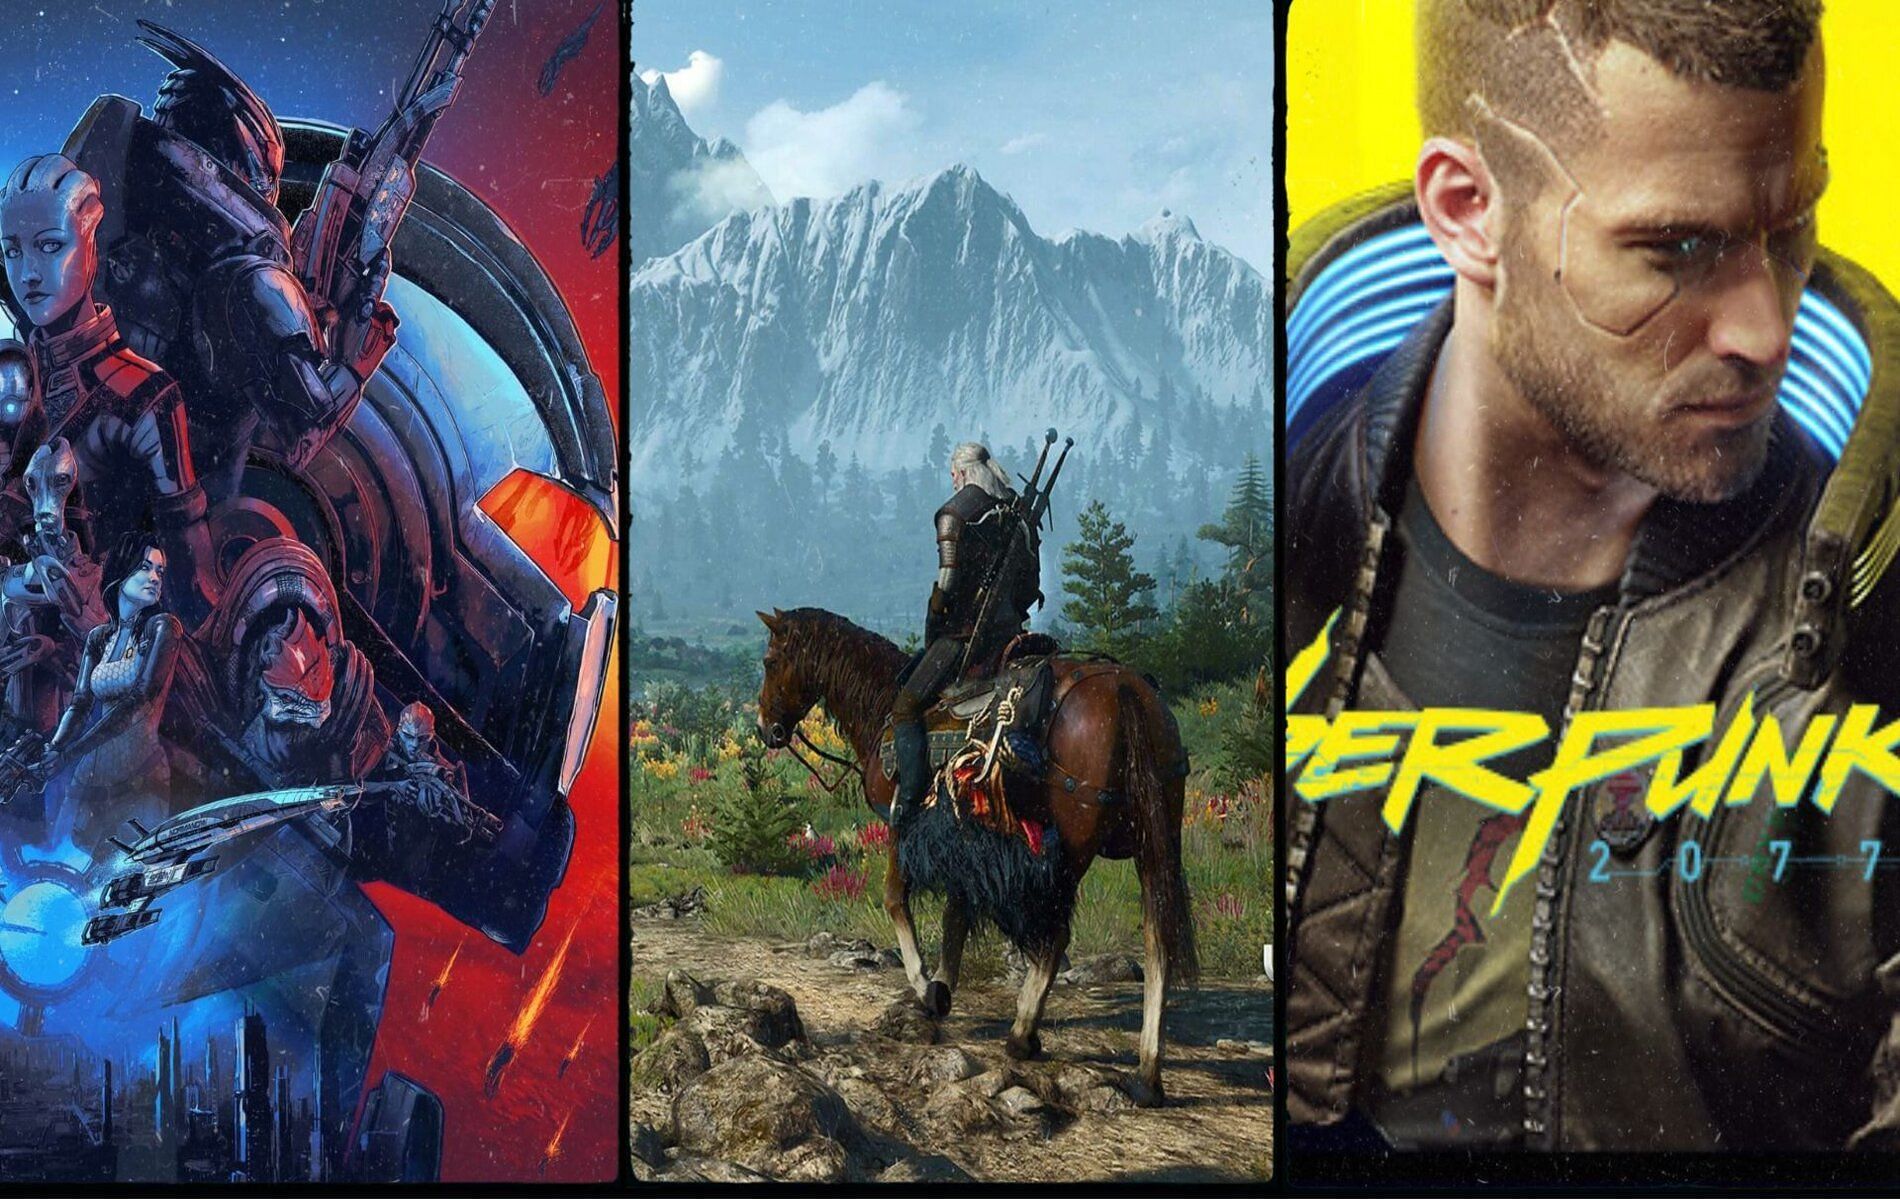 Screenshots and coverart from Mass Effect, The Witcher 3 and Cyberpunk 2077